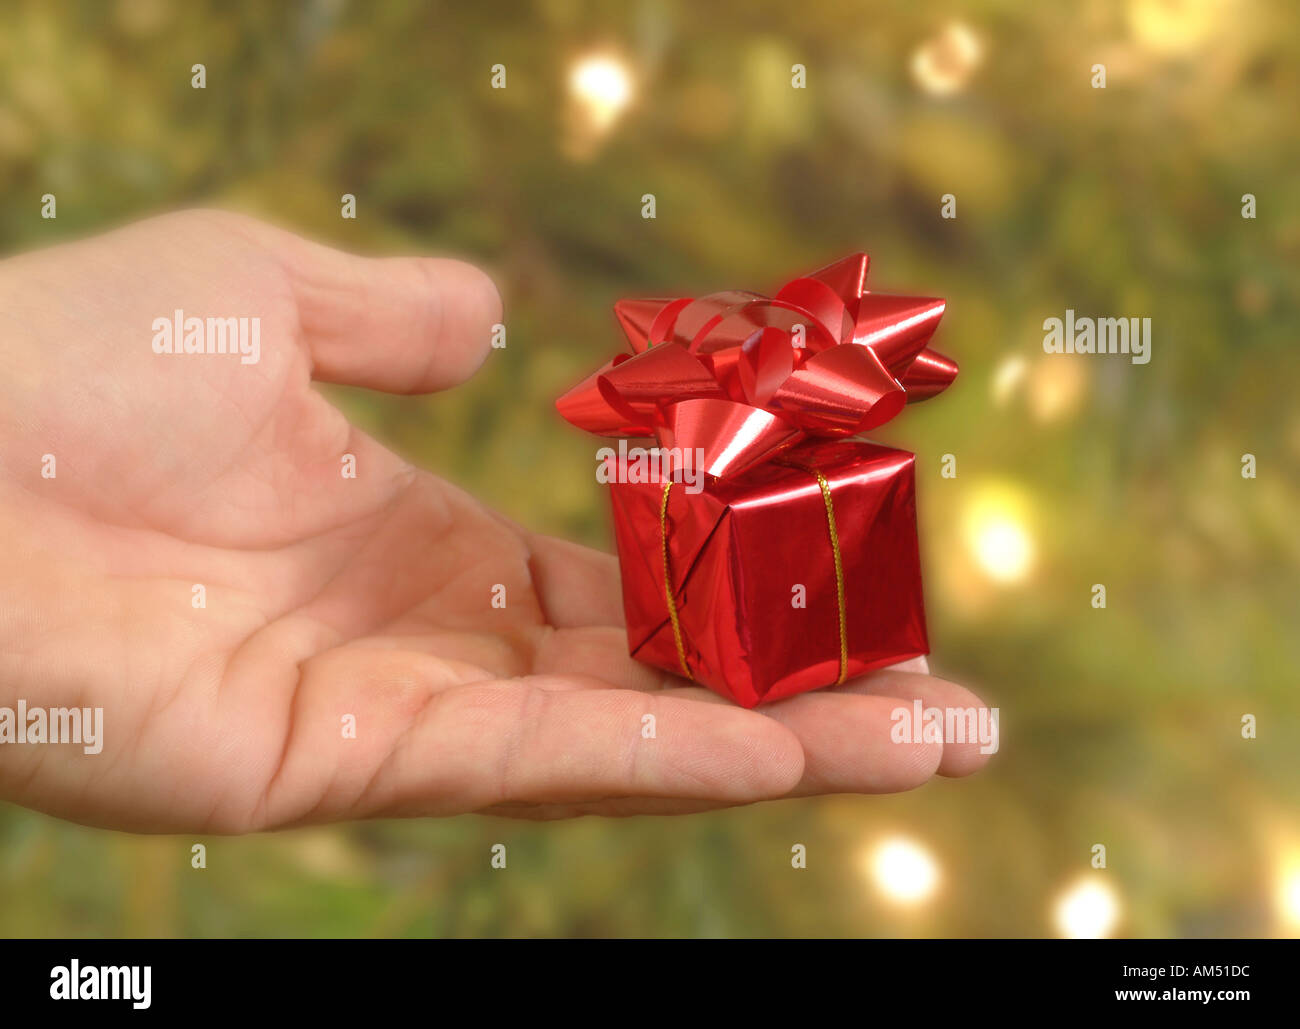 A very small Christmas gift held in a hand by a Christmas tree Stock Photo